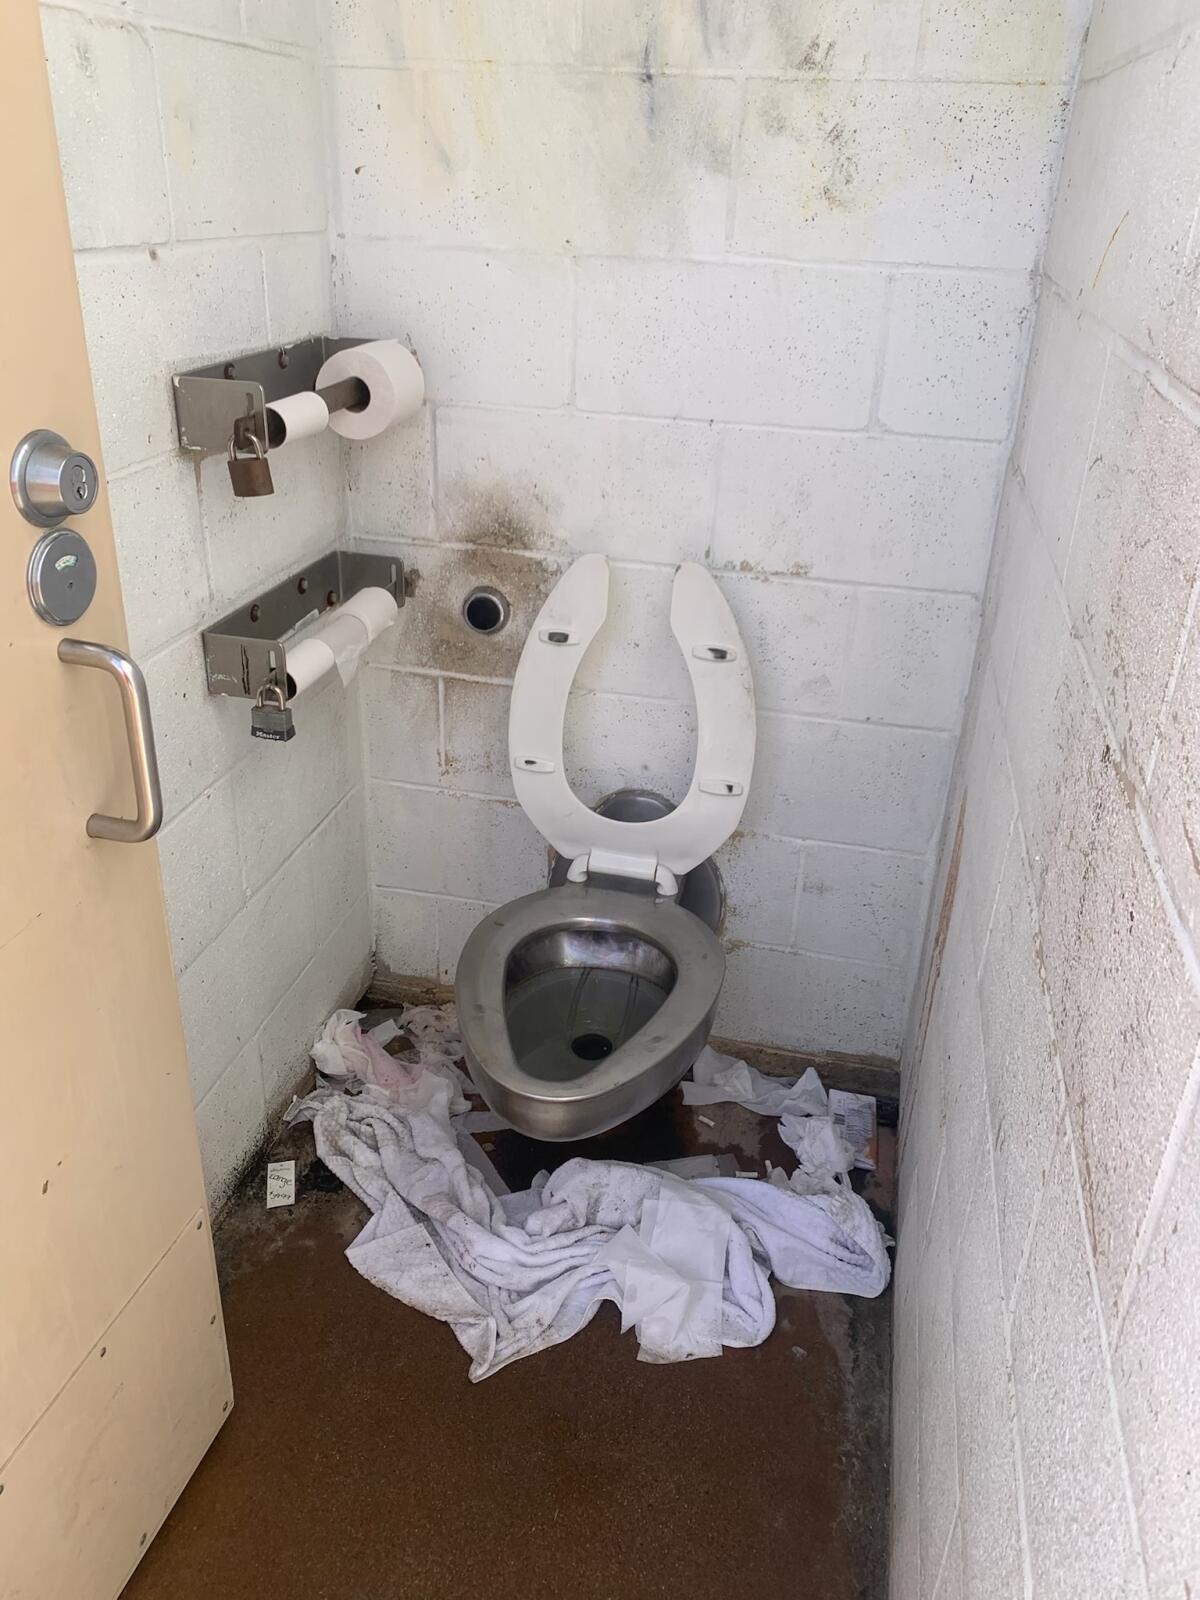 This Kellogg Park toilet, photographed Aug. 14, shows the state of some "comfort station" restrooms.